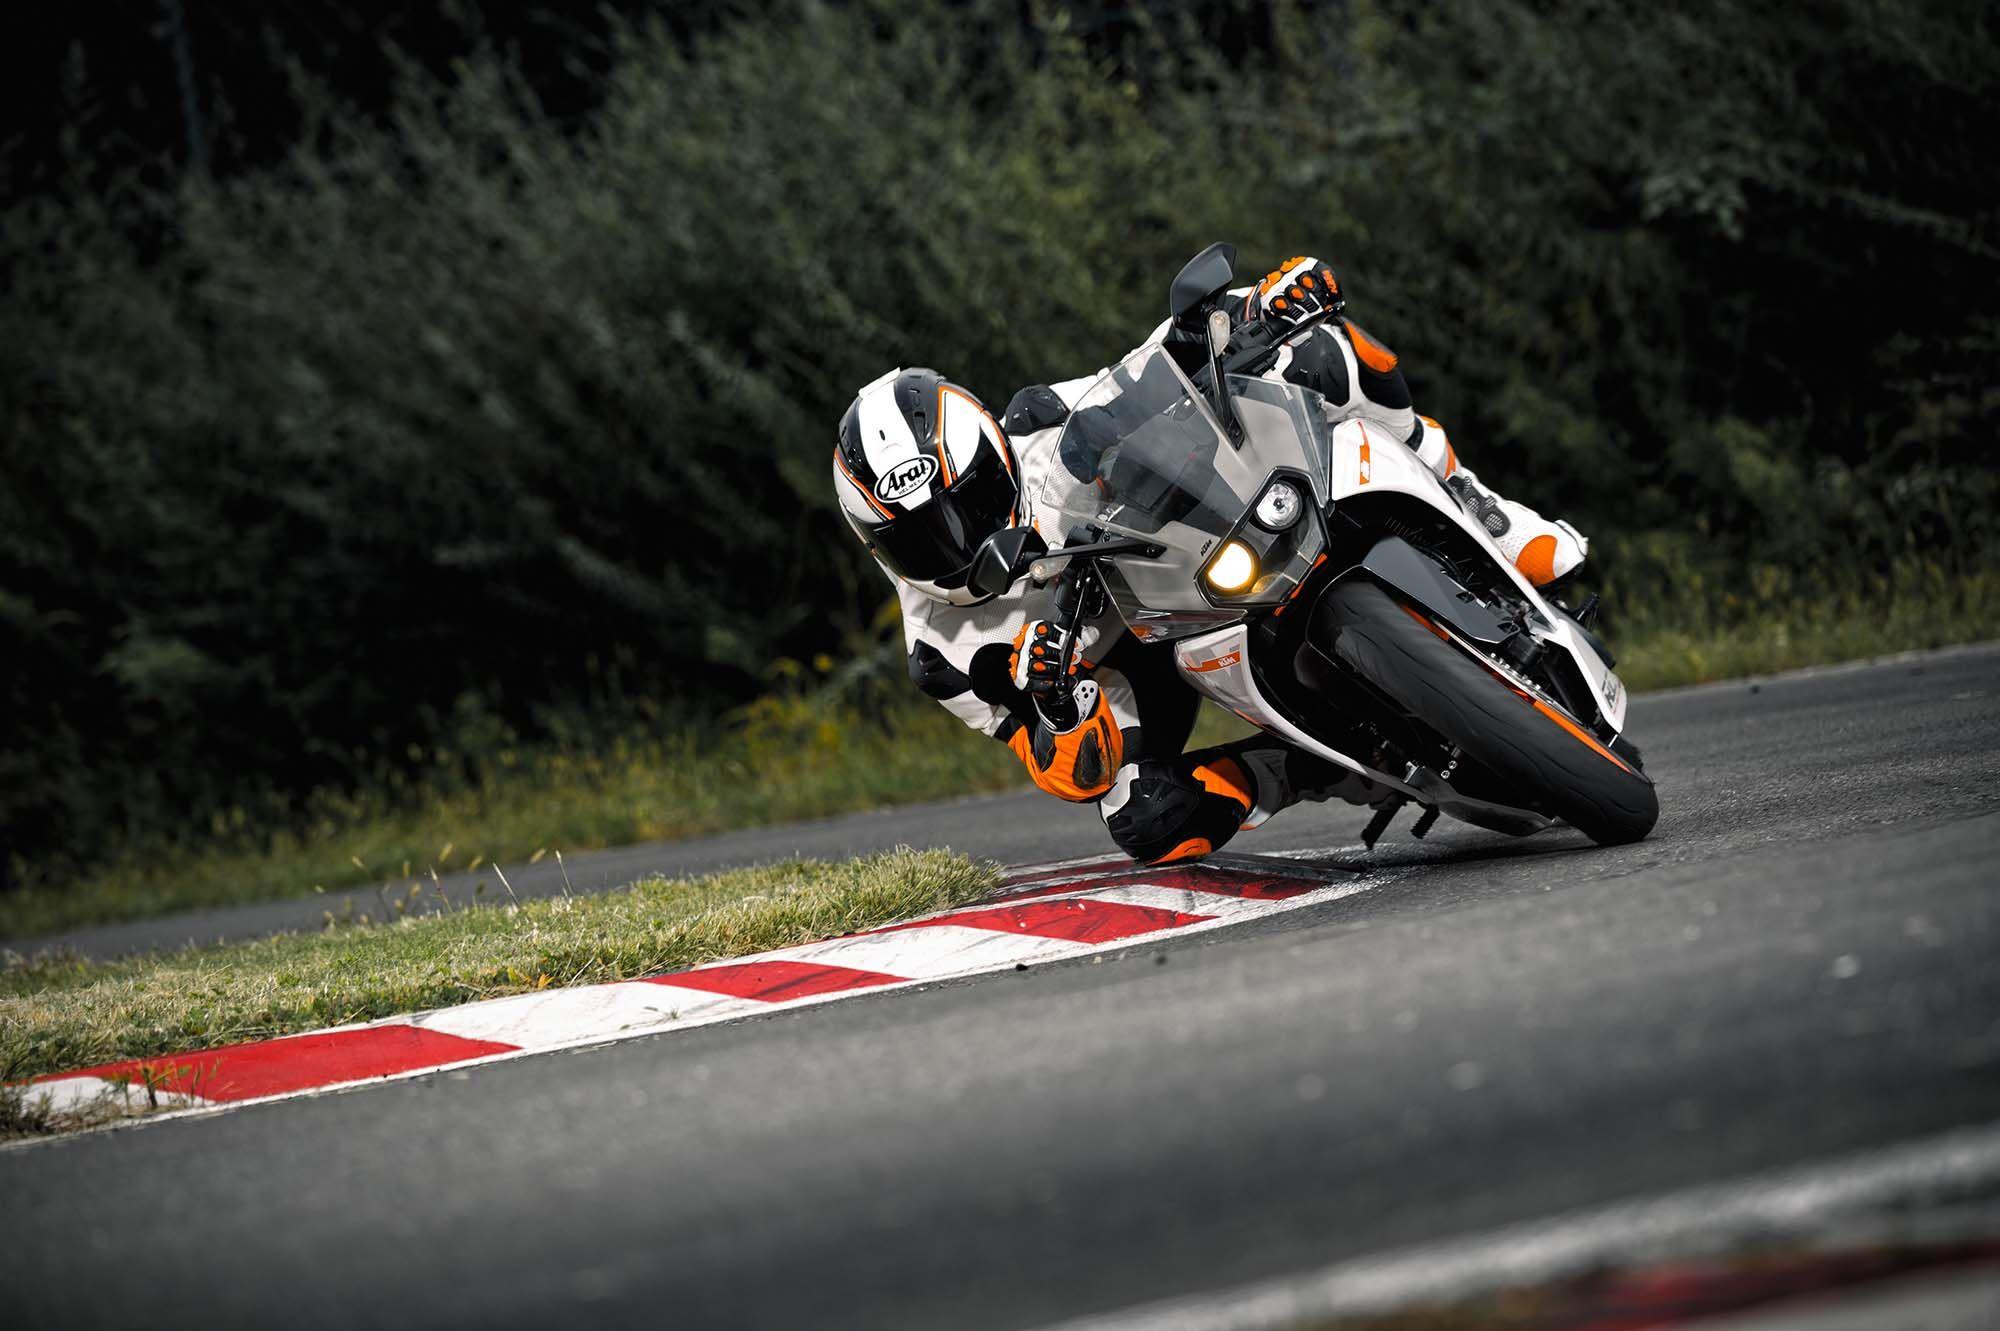 Ktm Rc 390 Photo and Wallpaper